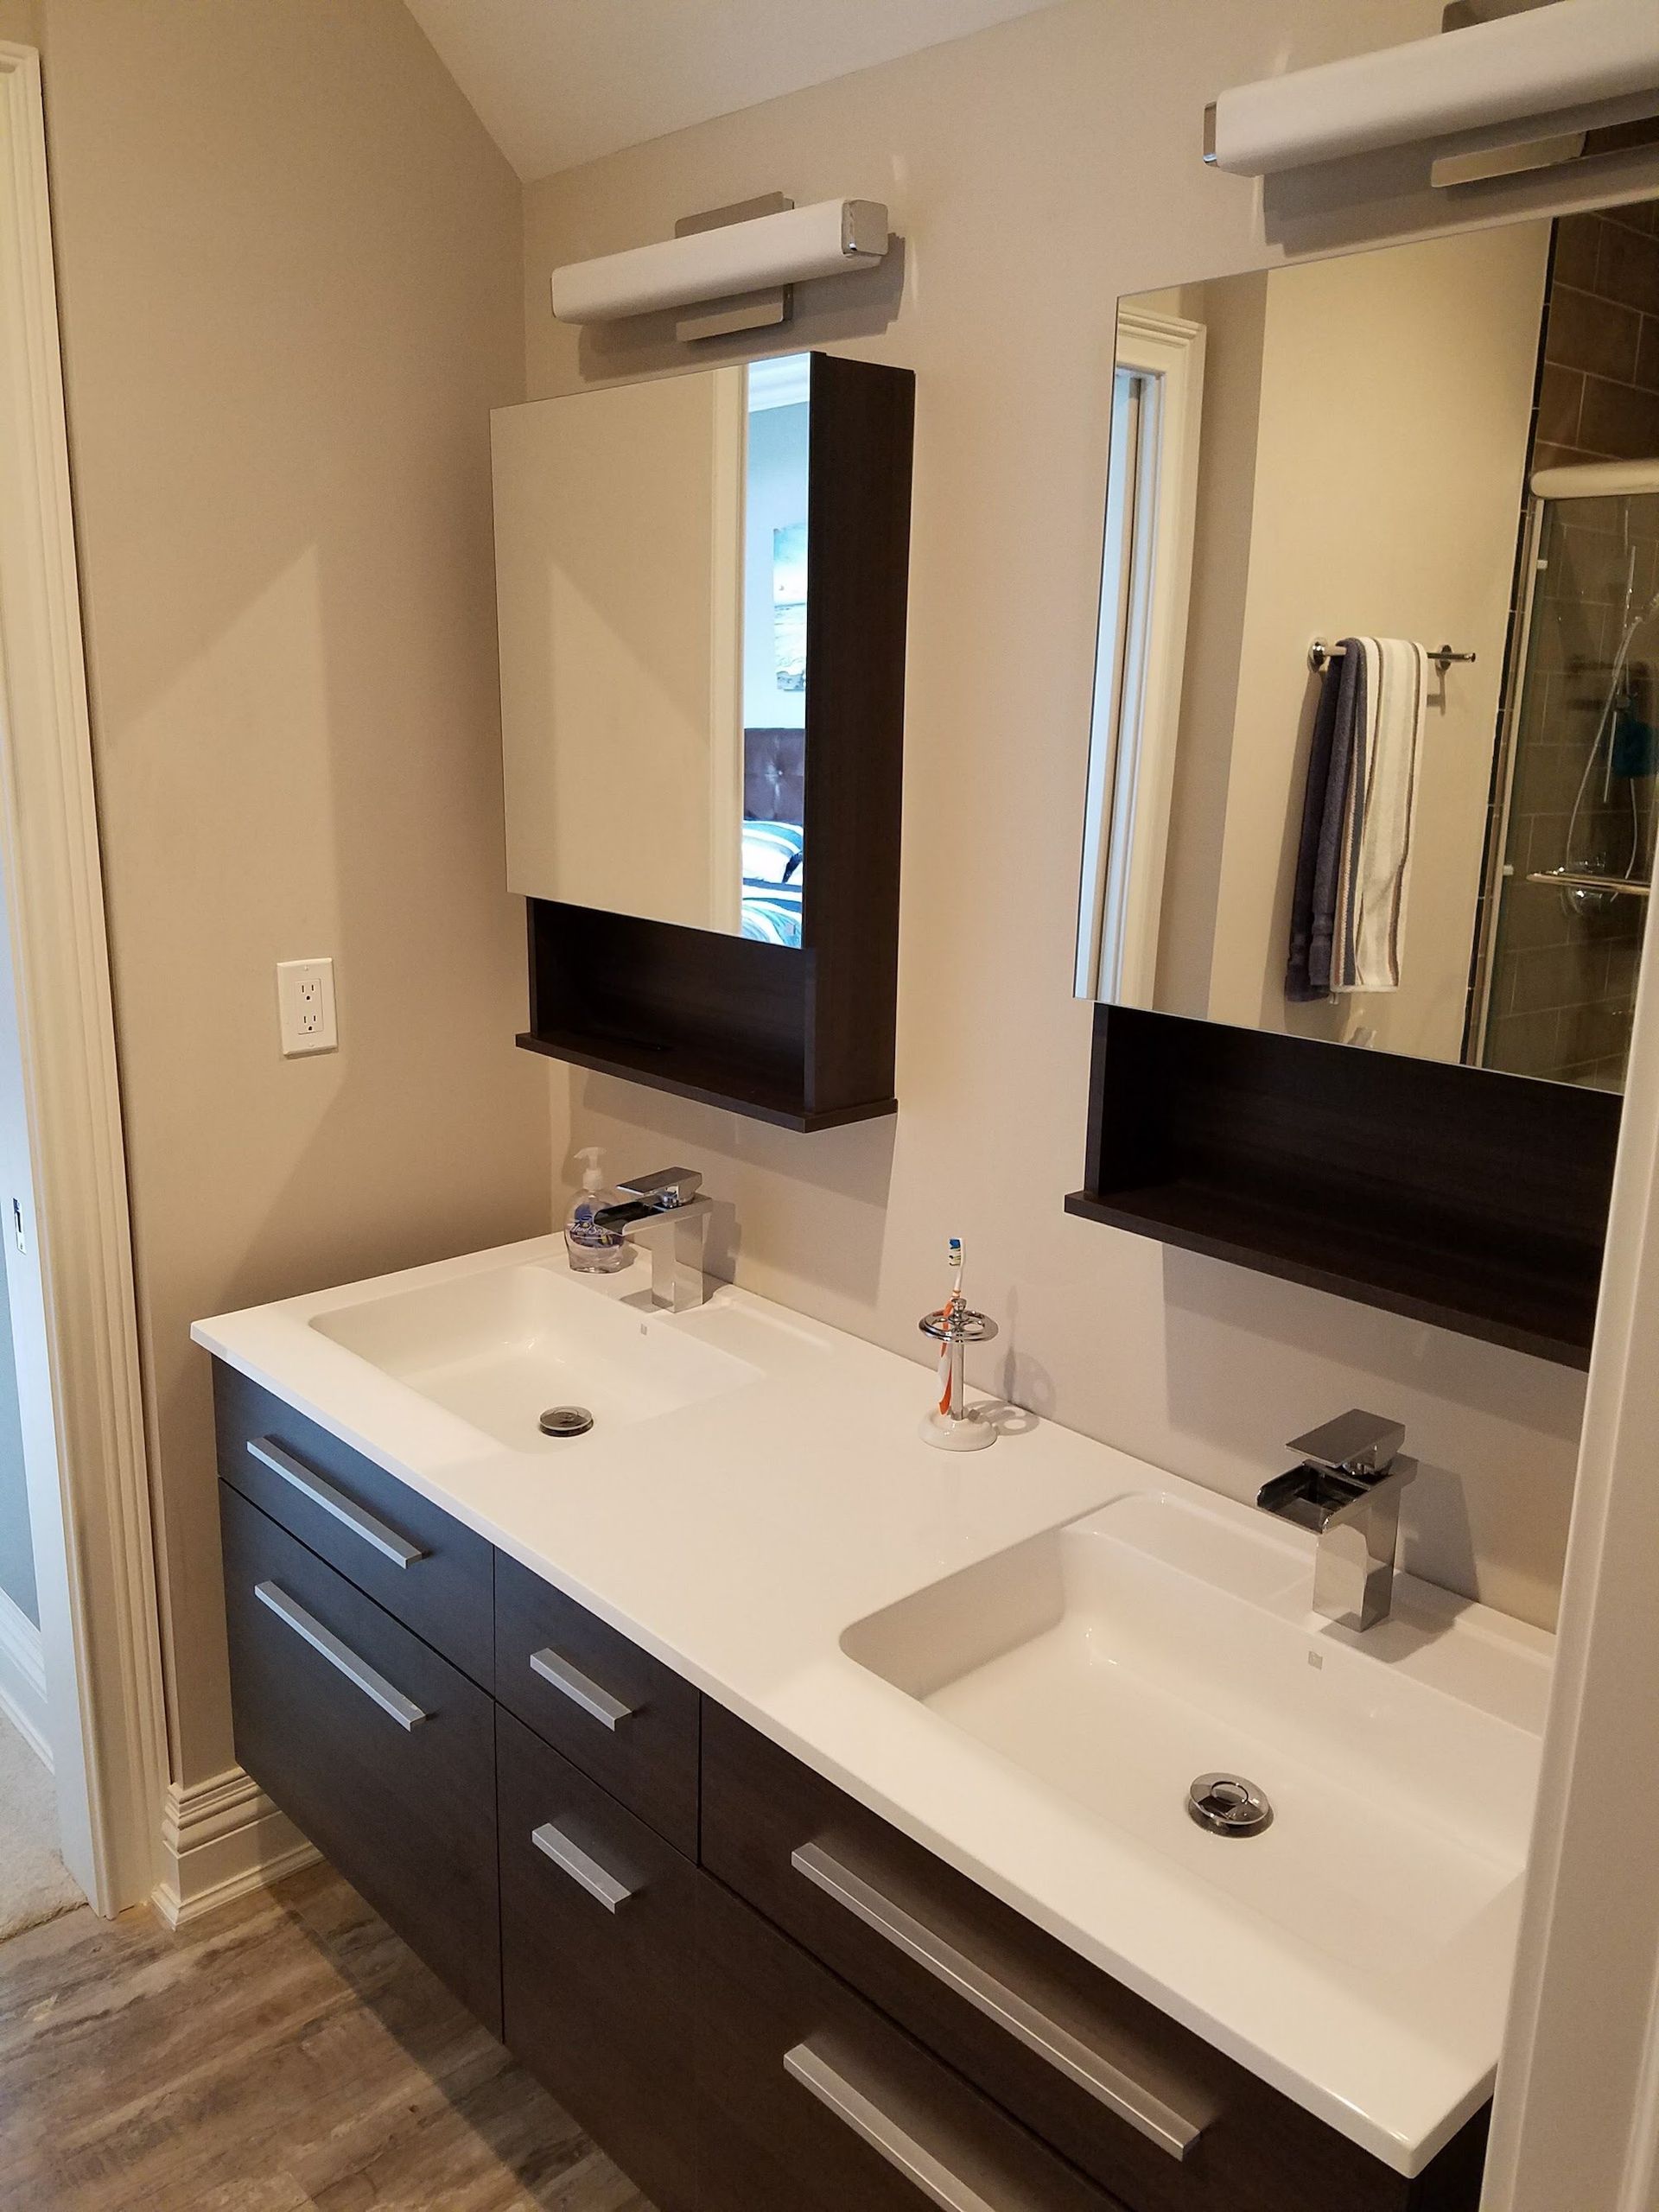 bathroom remodeling contractors in st. james. ny